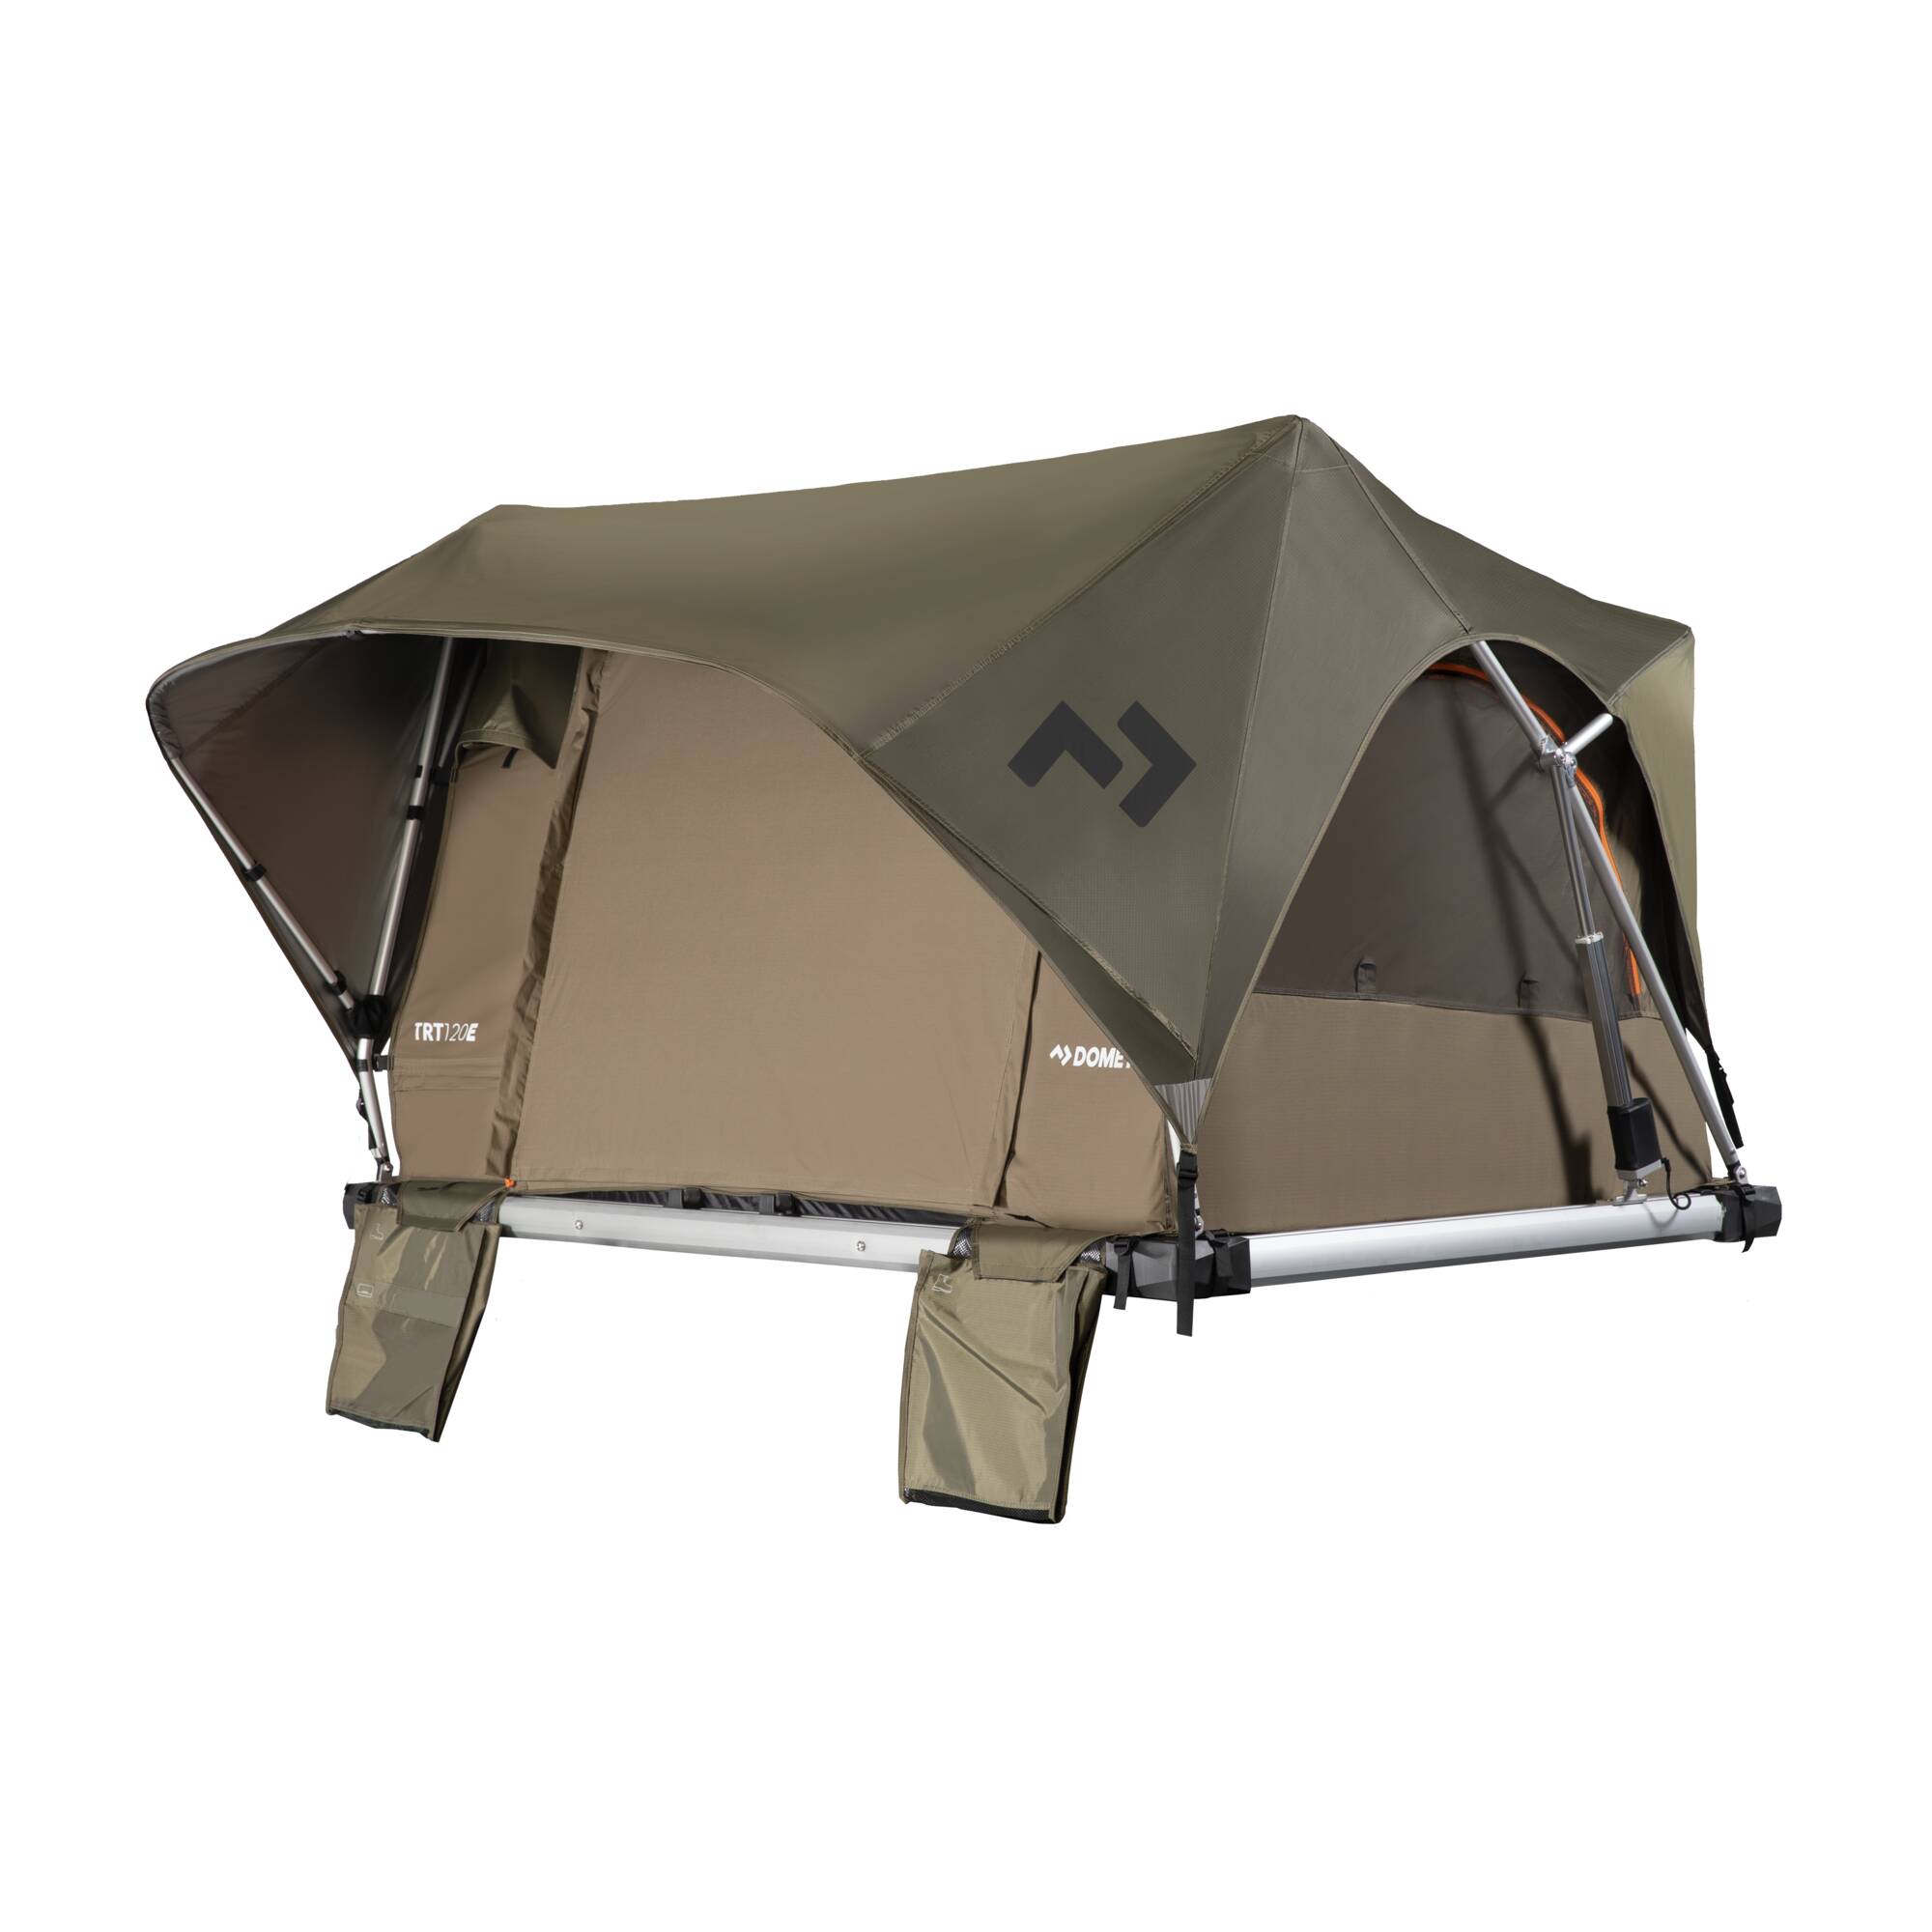 Dometic Trt120e Roof-top (forest Green) Tent Spare Parts